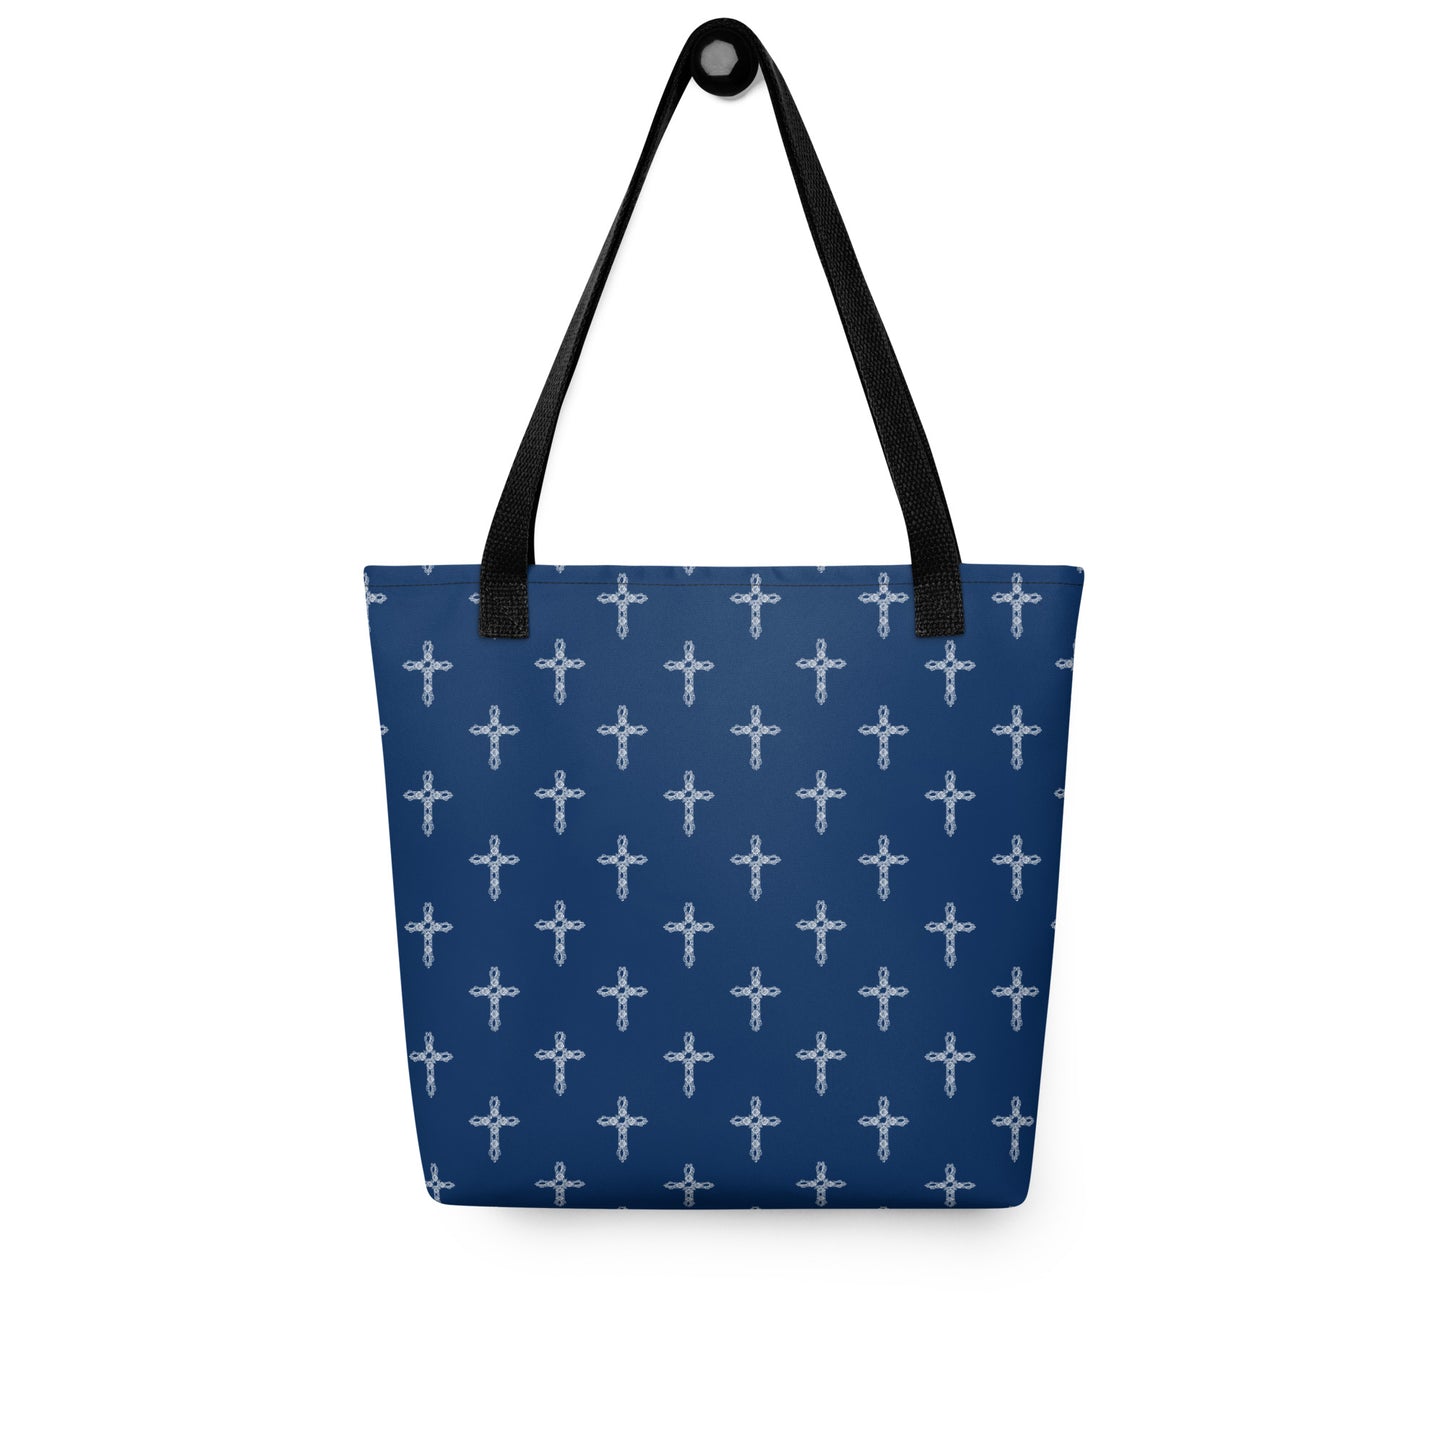 Navy blue tote bag or purse with black handles hanging on a black hook.